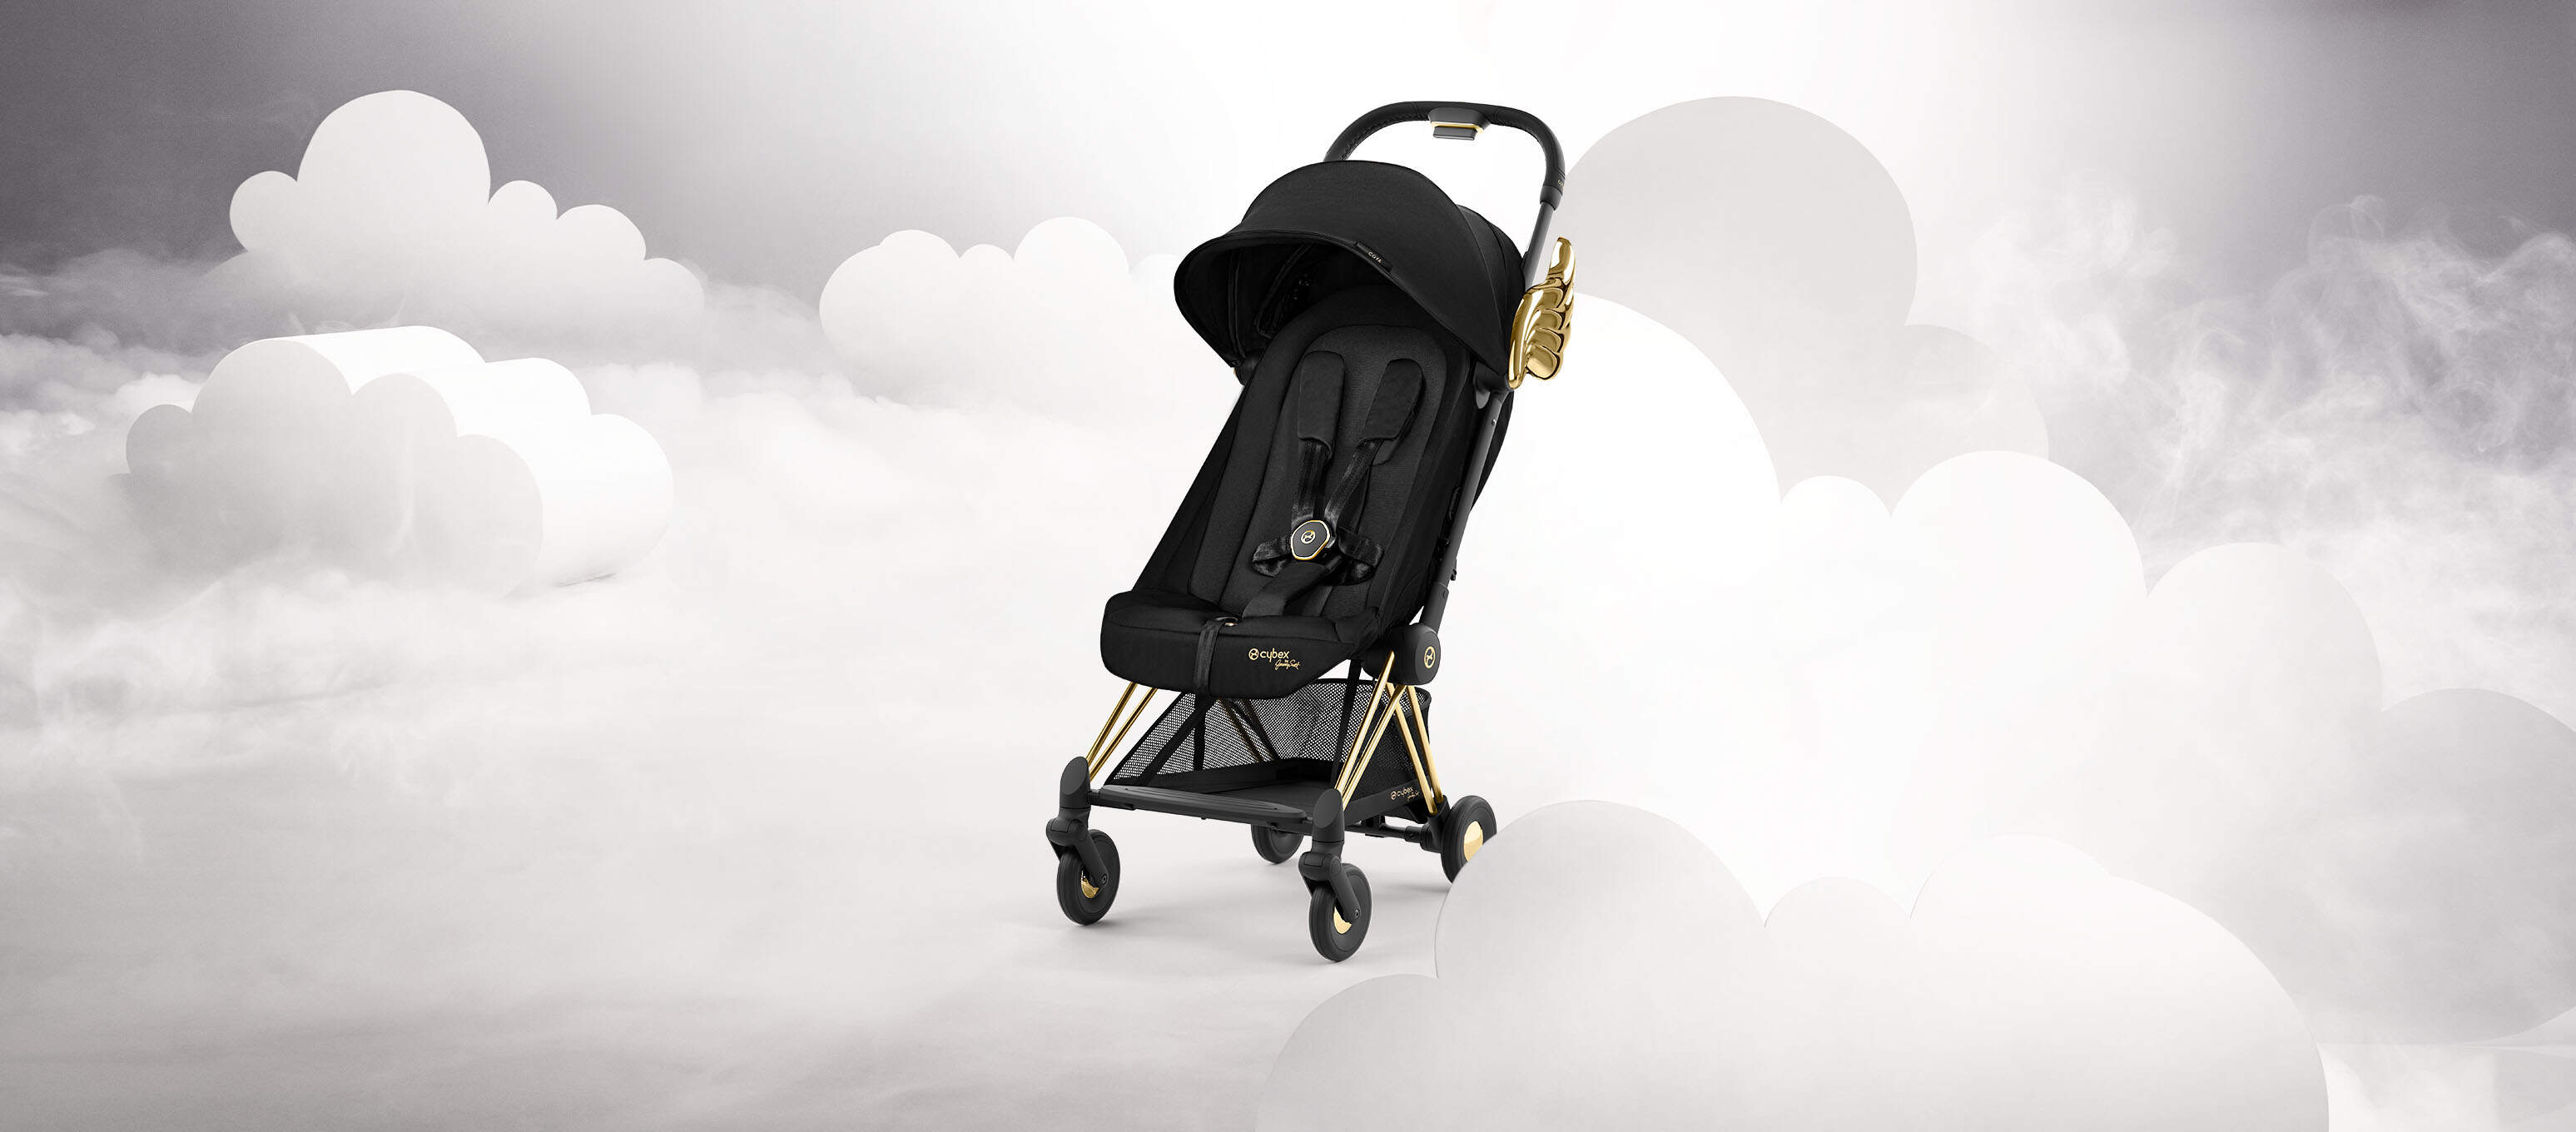 Cybex by Jeremy Scott Wings Collection